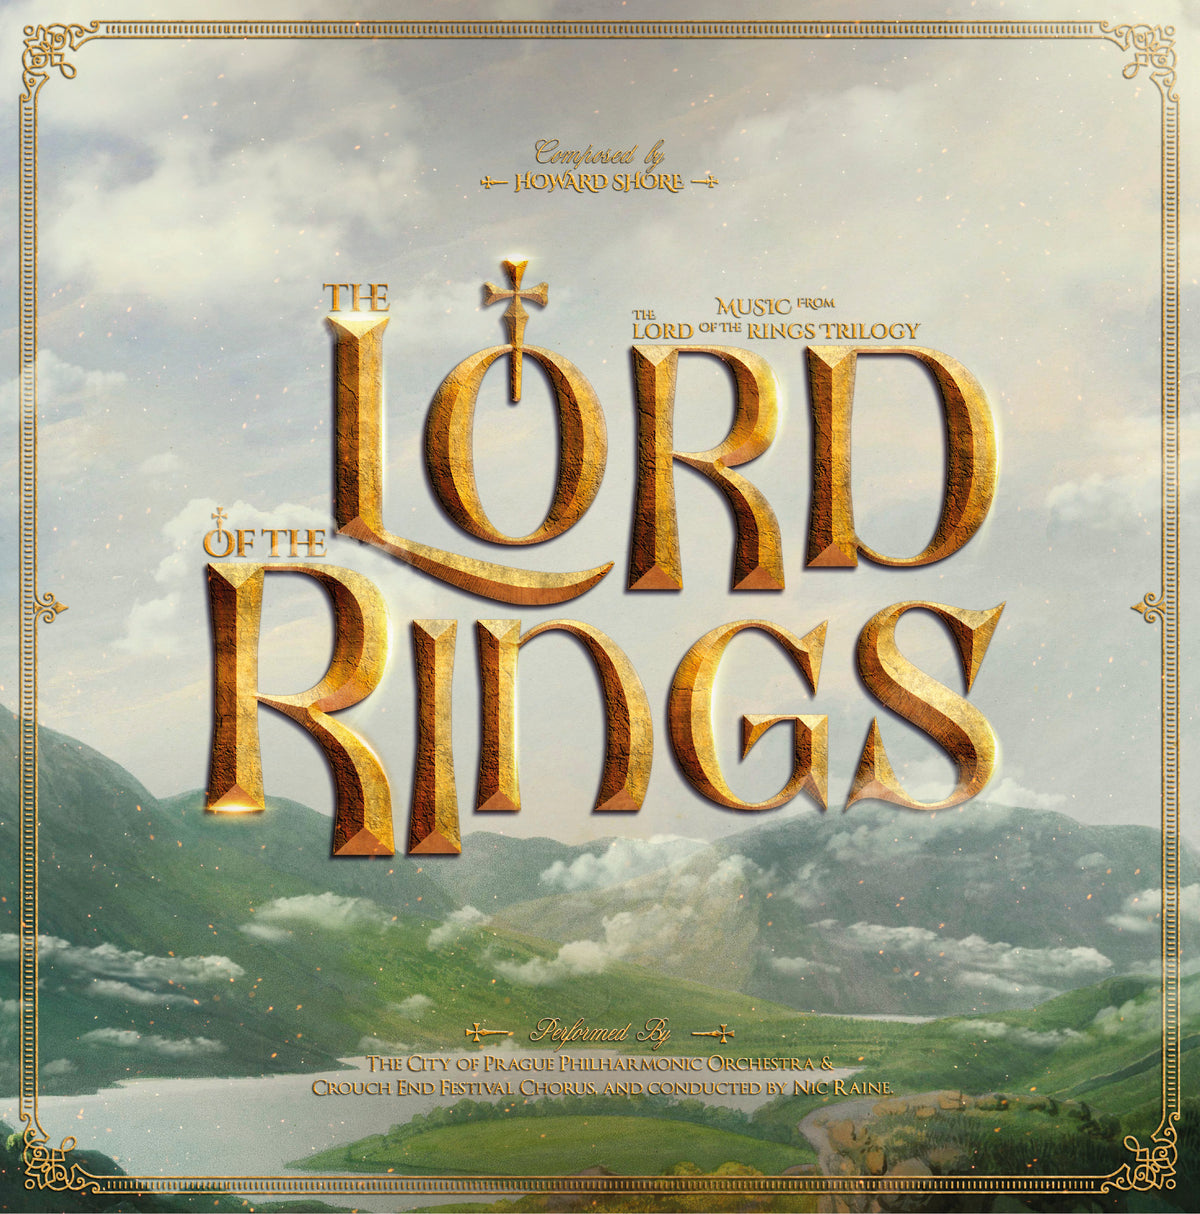 Howard Shore/City of Prague Philharmonic Orchestra - The Music of the Lord of the Rings Trilogy (LP)